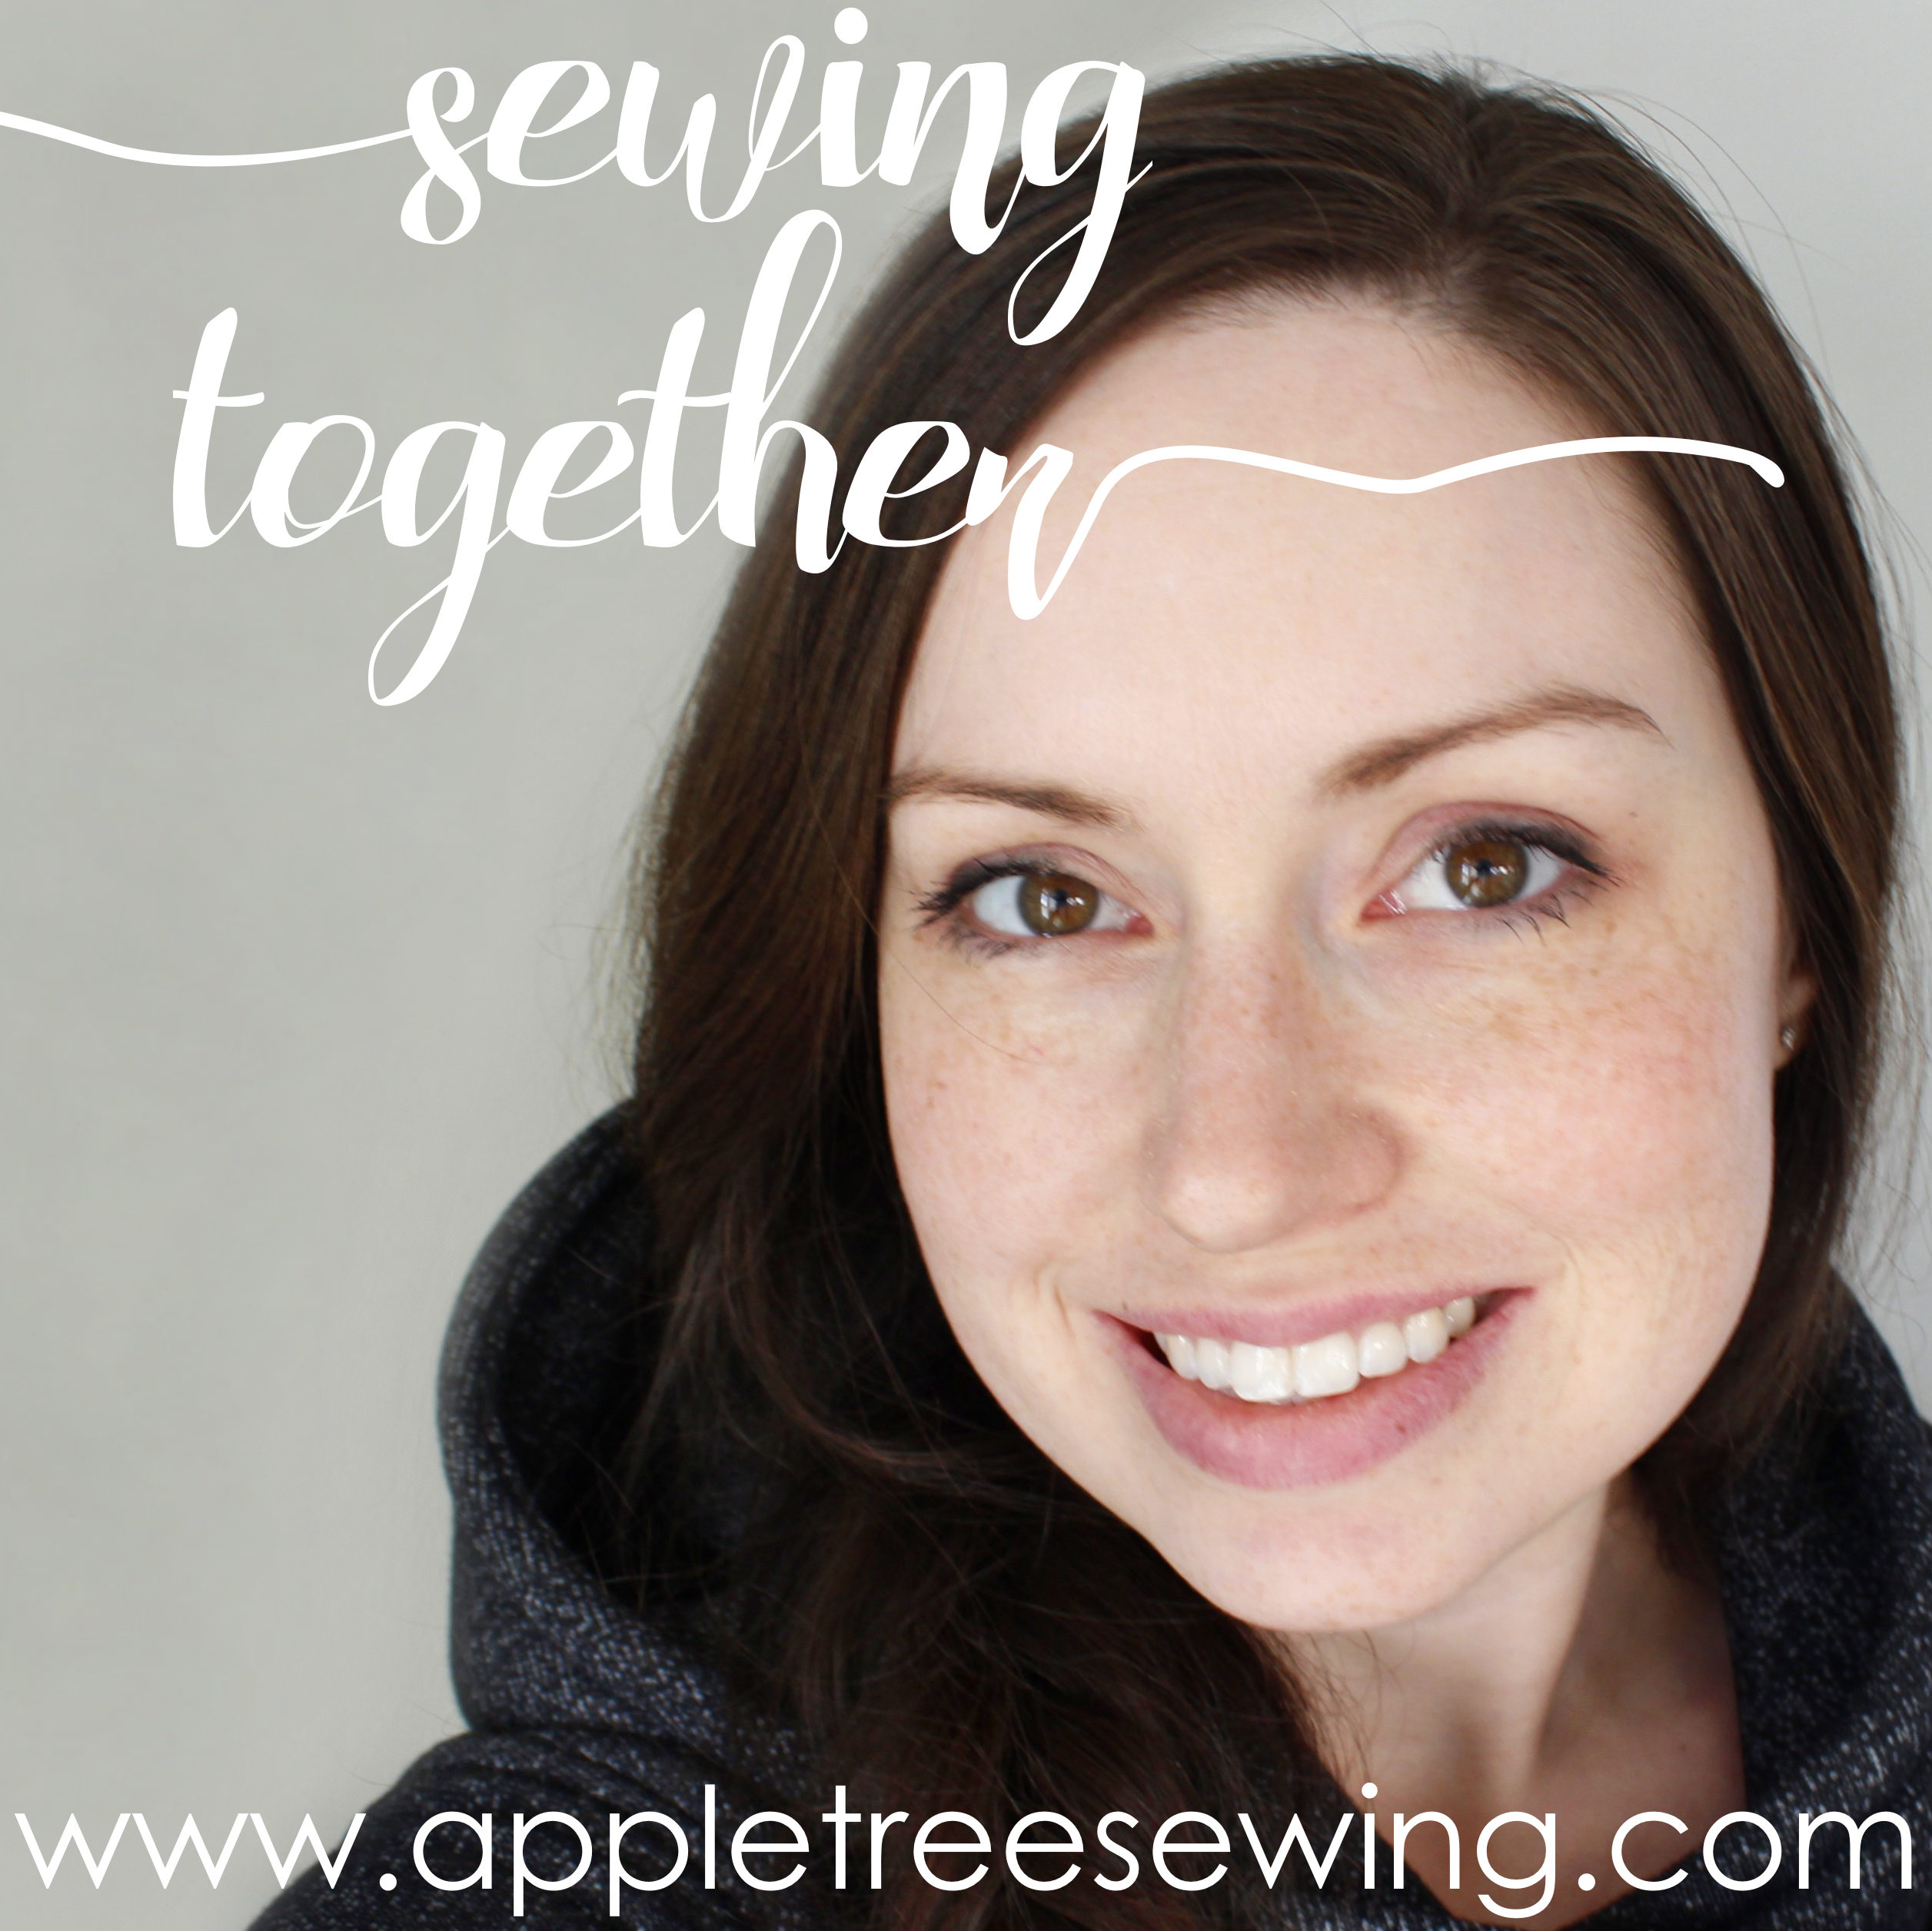 Episode 3: 6 Reasons Why You Should Learn To Sew Your Own Clothes